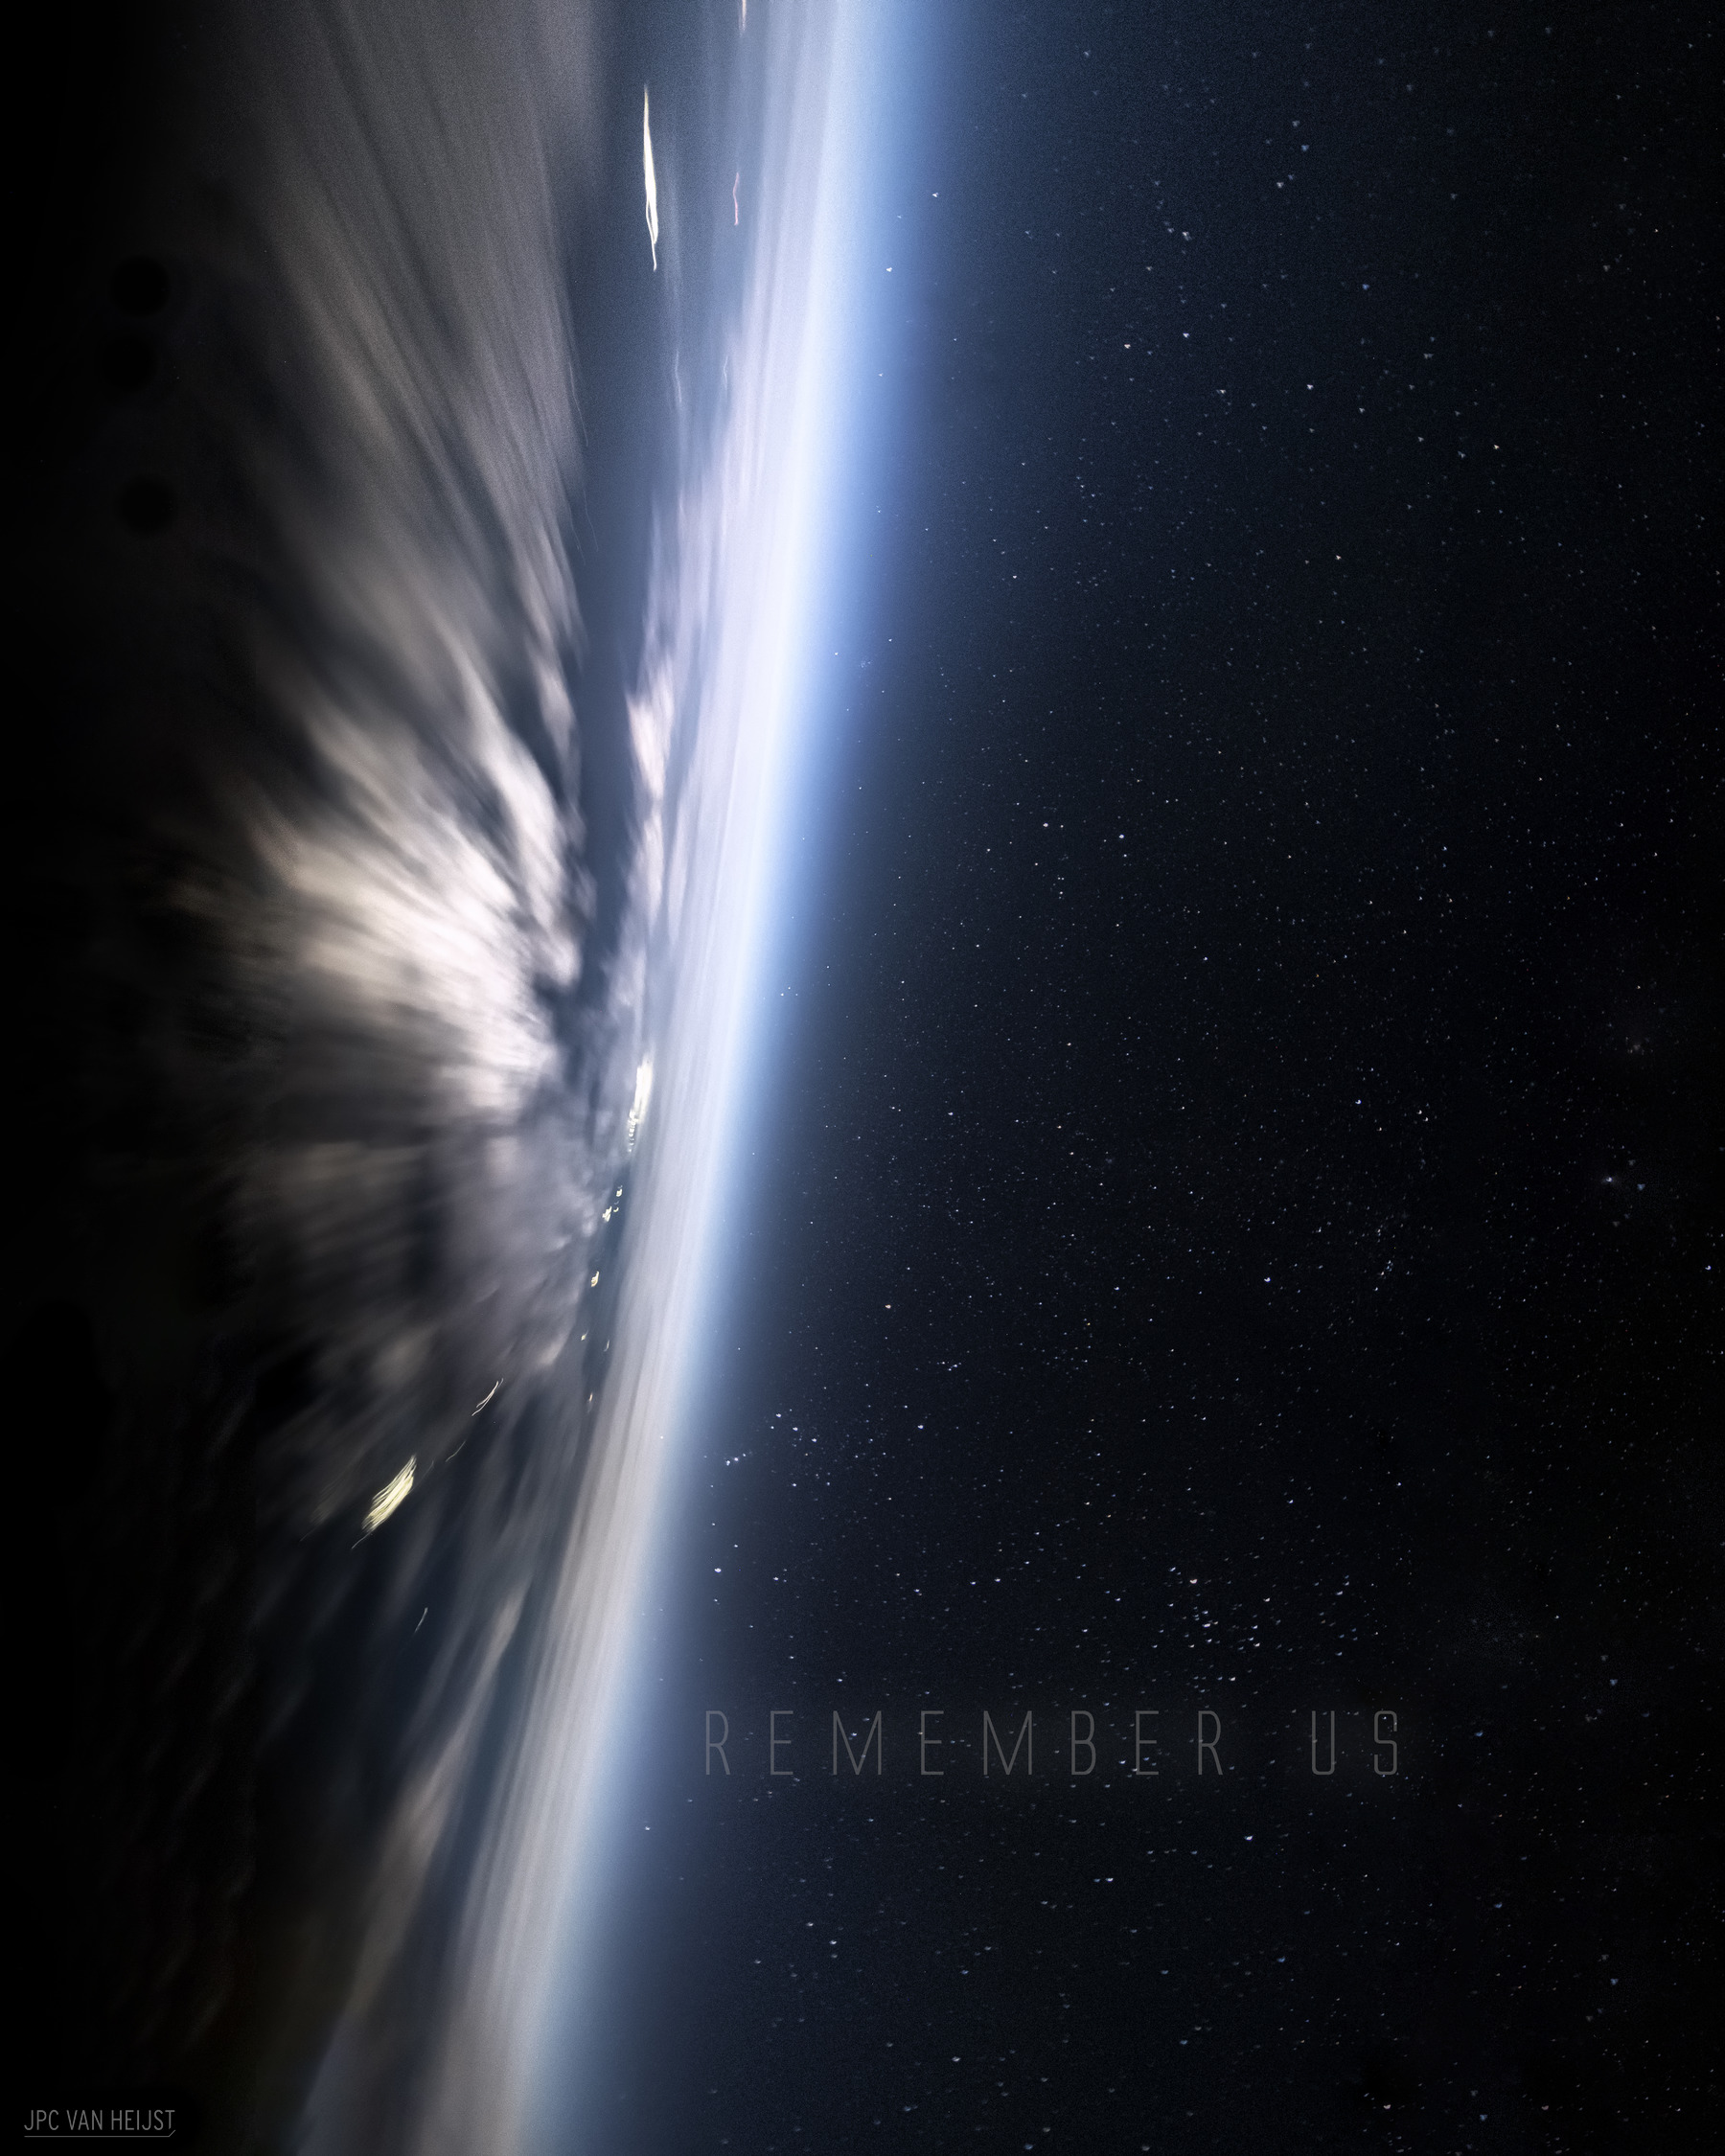 Remember us' - A short Sci-Fi story